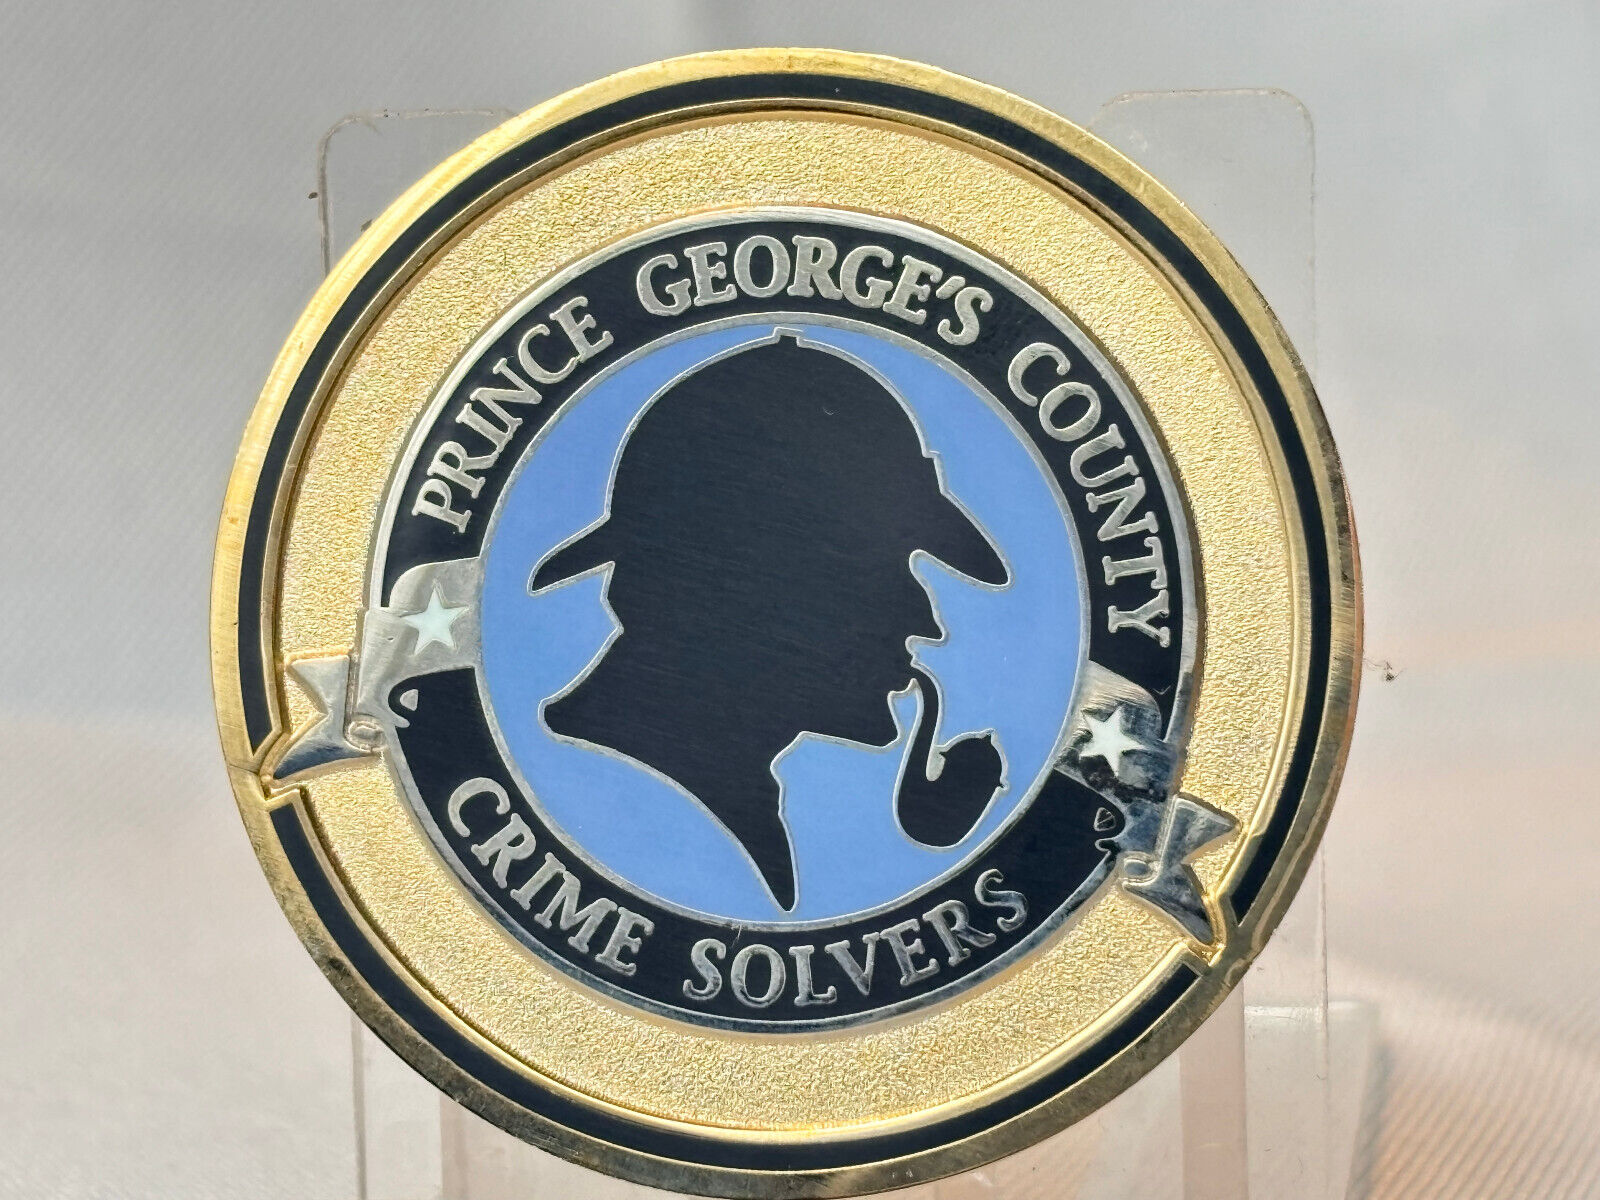 Prince George\'s County Police MD Challenge Coin Crime Solvers